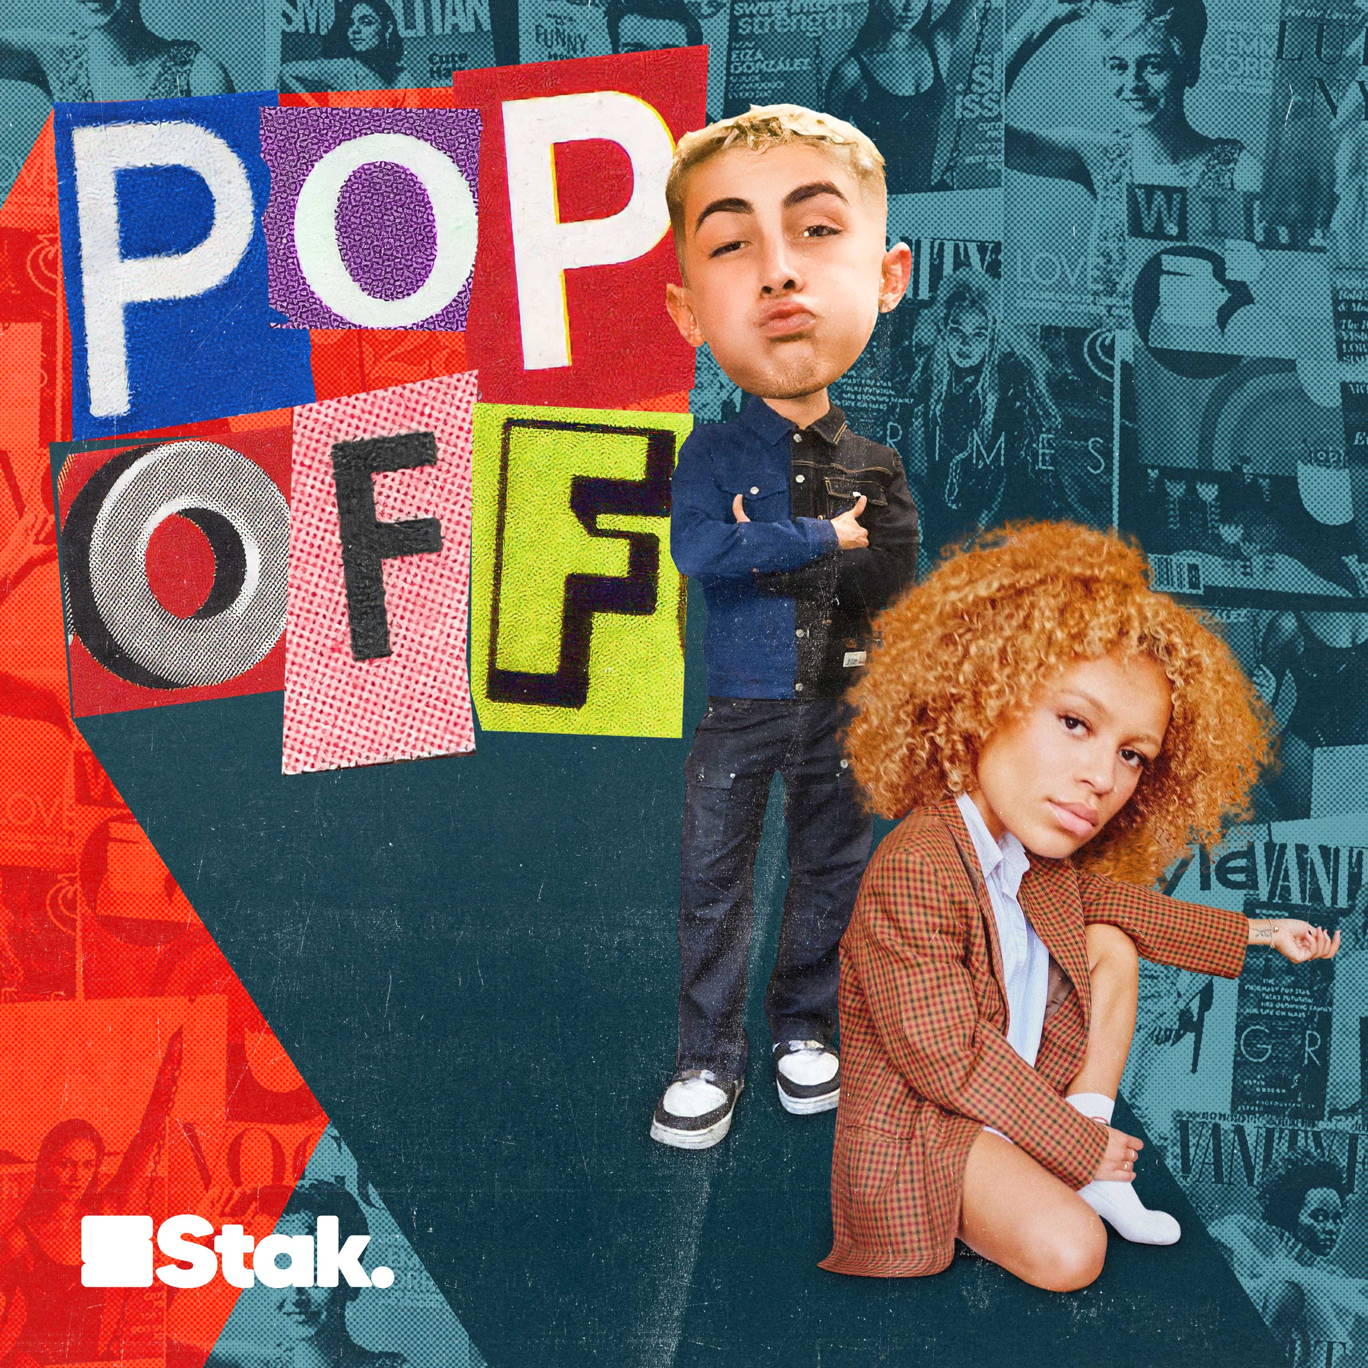 The artwork for the Pop Off podcast.